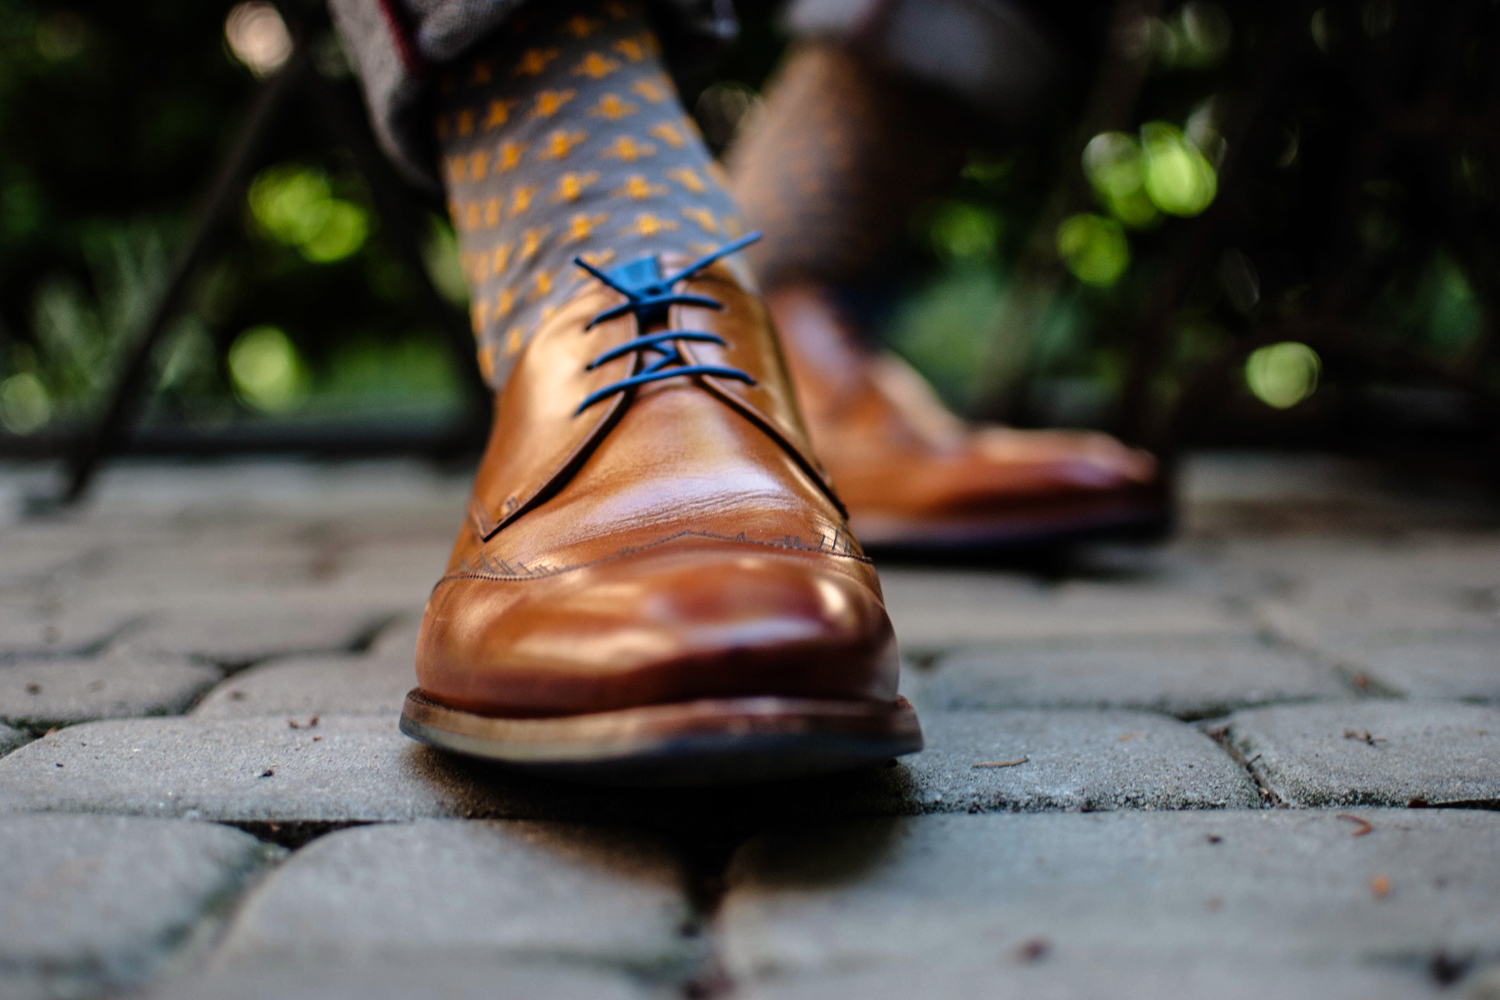 Black No-Tie shoelaces specifically made for dress shoes. Allowing you to  turn classic dress shoes into slip-ons while looking the exact same.